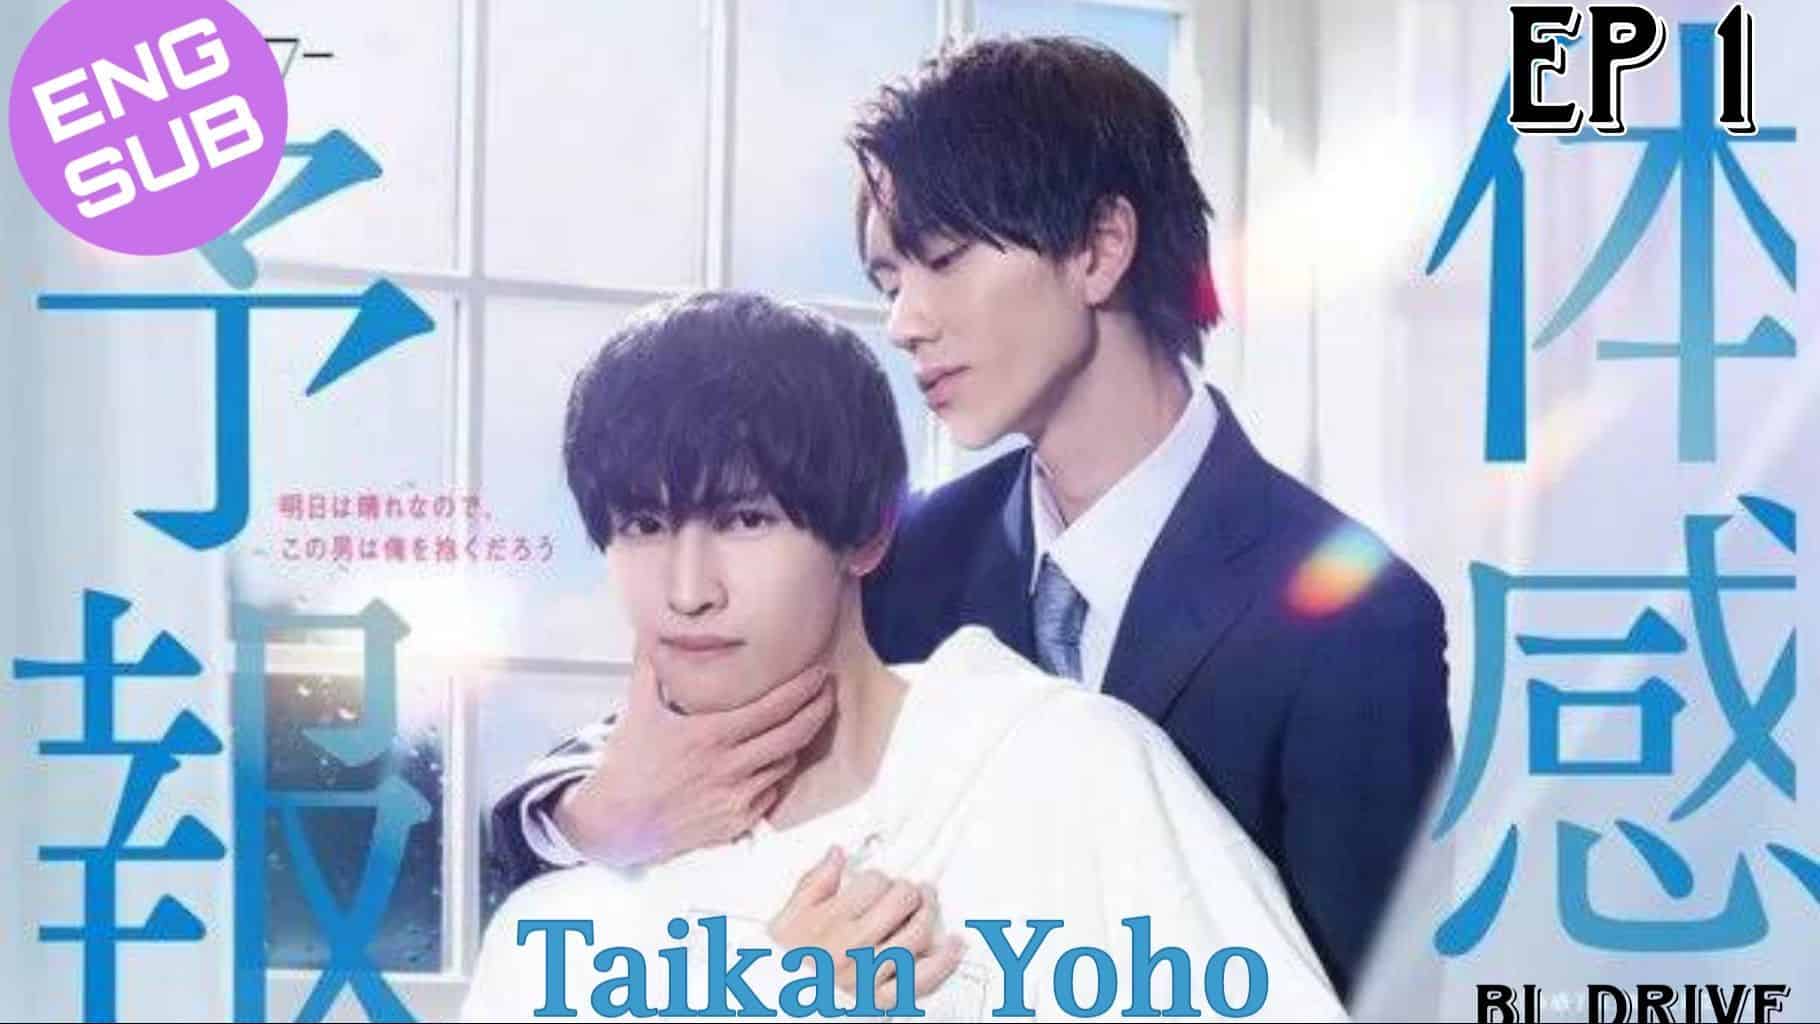 How to watch Taikan Yoho Episodes? Streaming Guide & Schedule